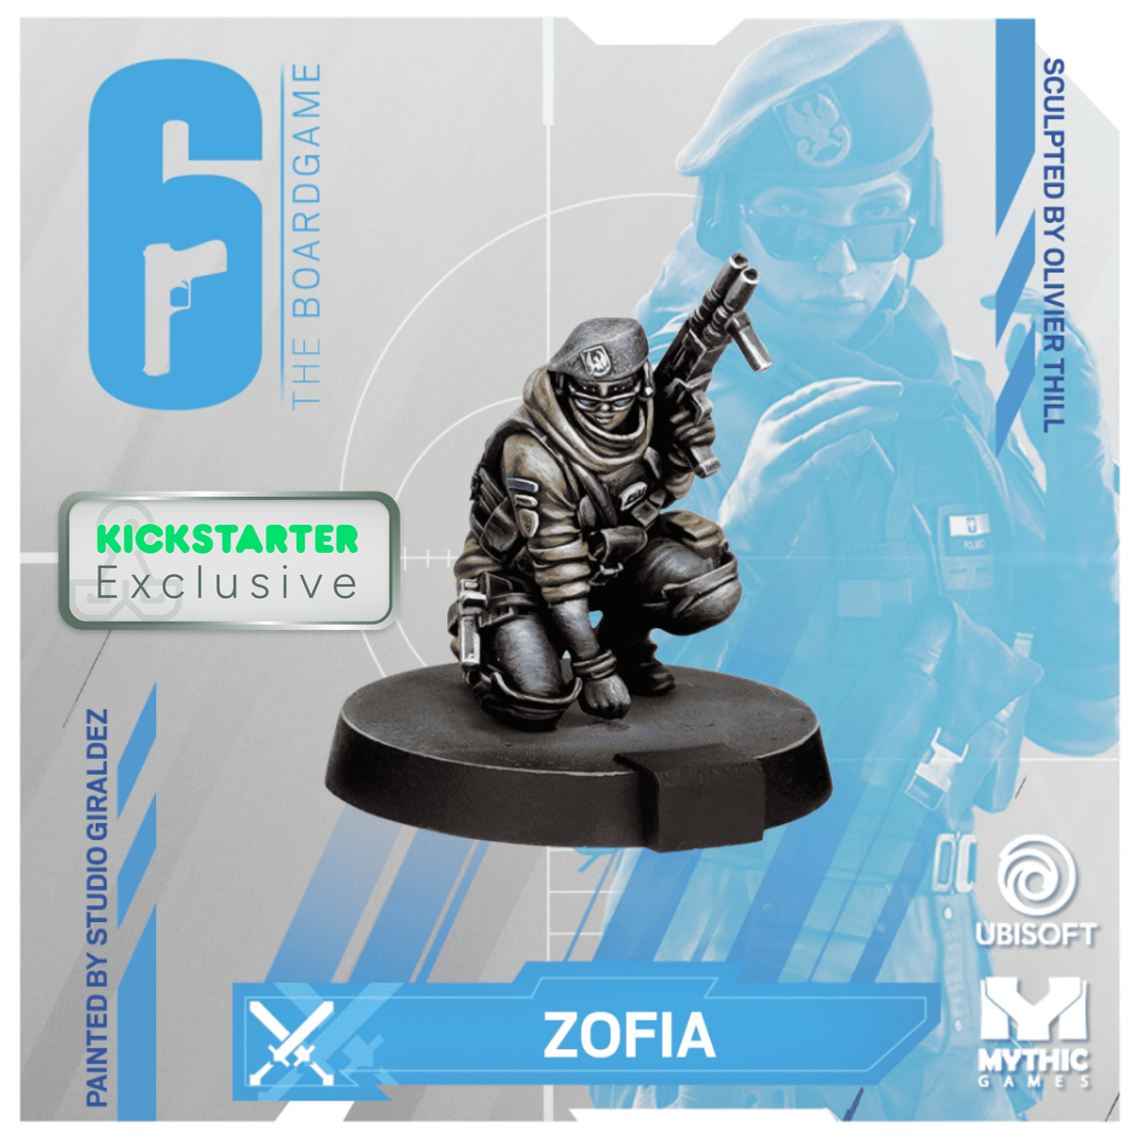 Kickstarter Exclusive Year 2 Expansion, Zofia Miniature, From 6: Siege - The Board Game